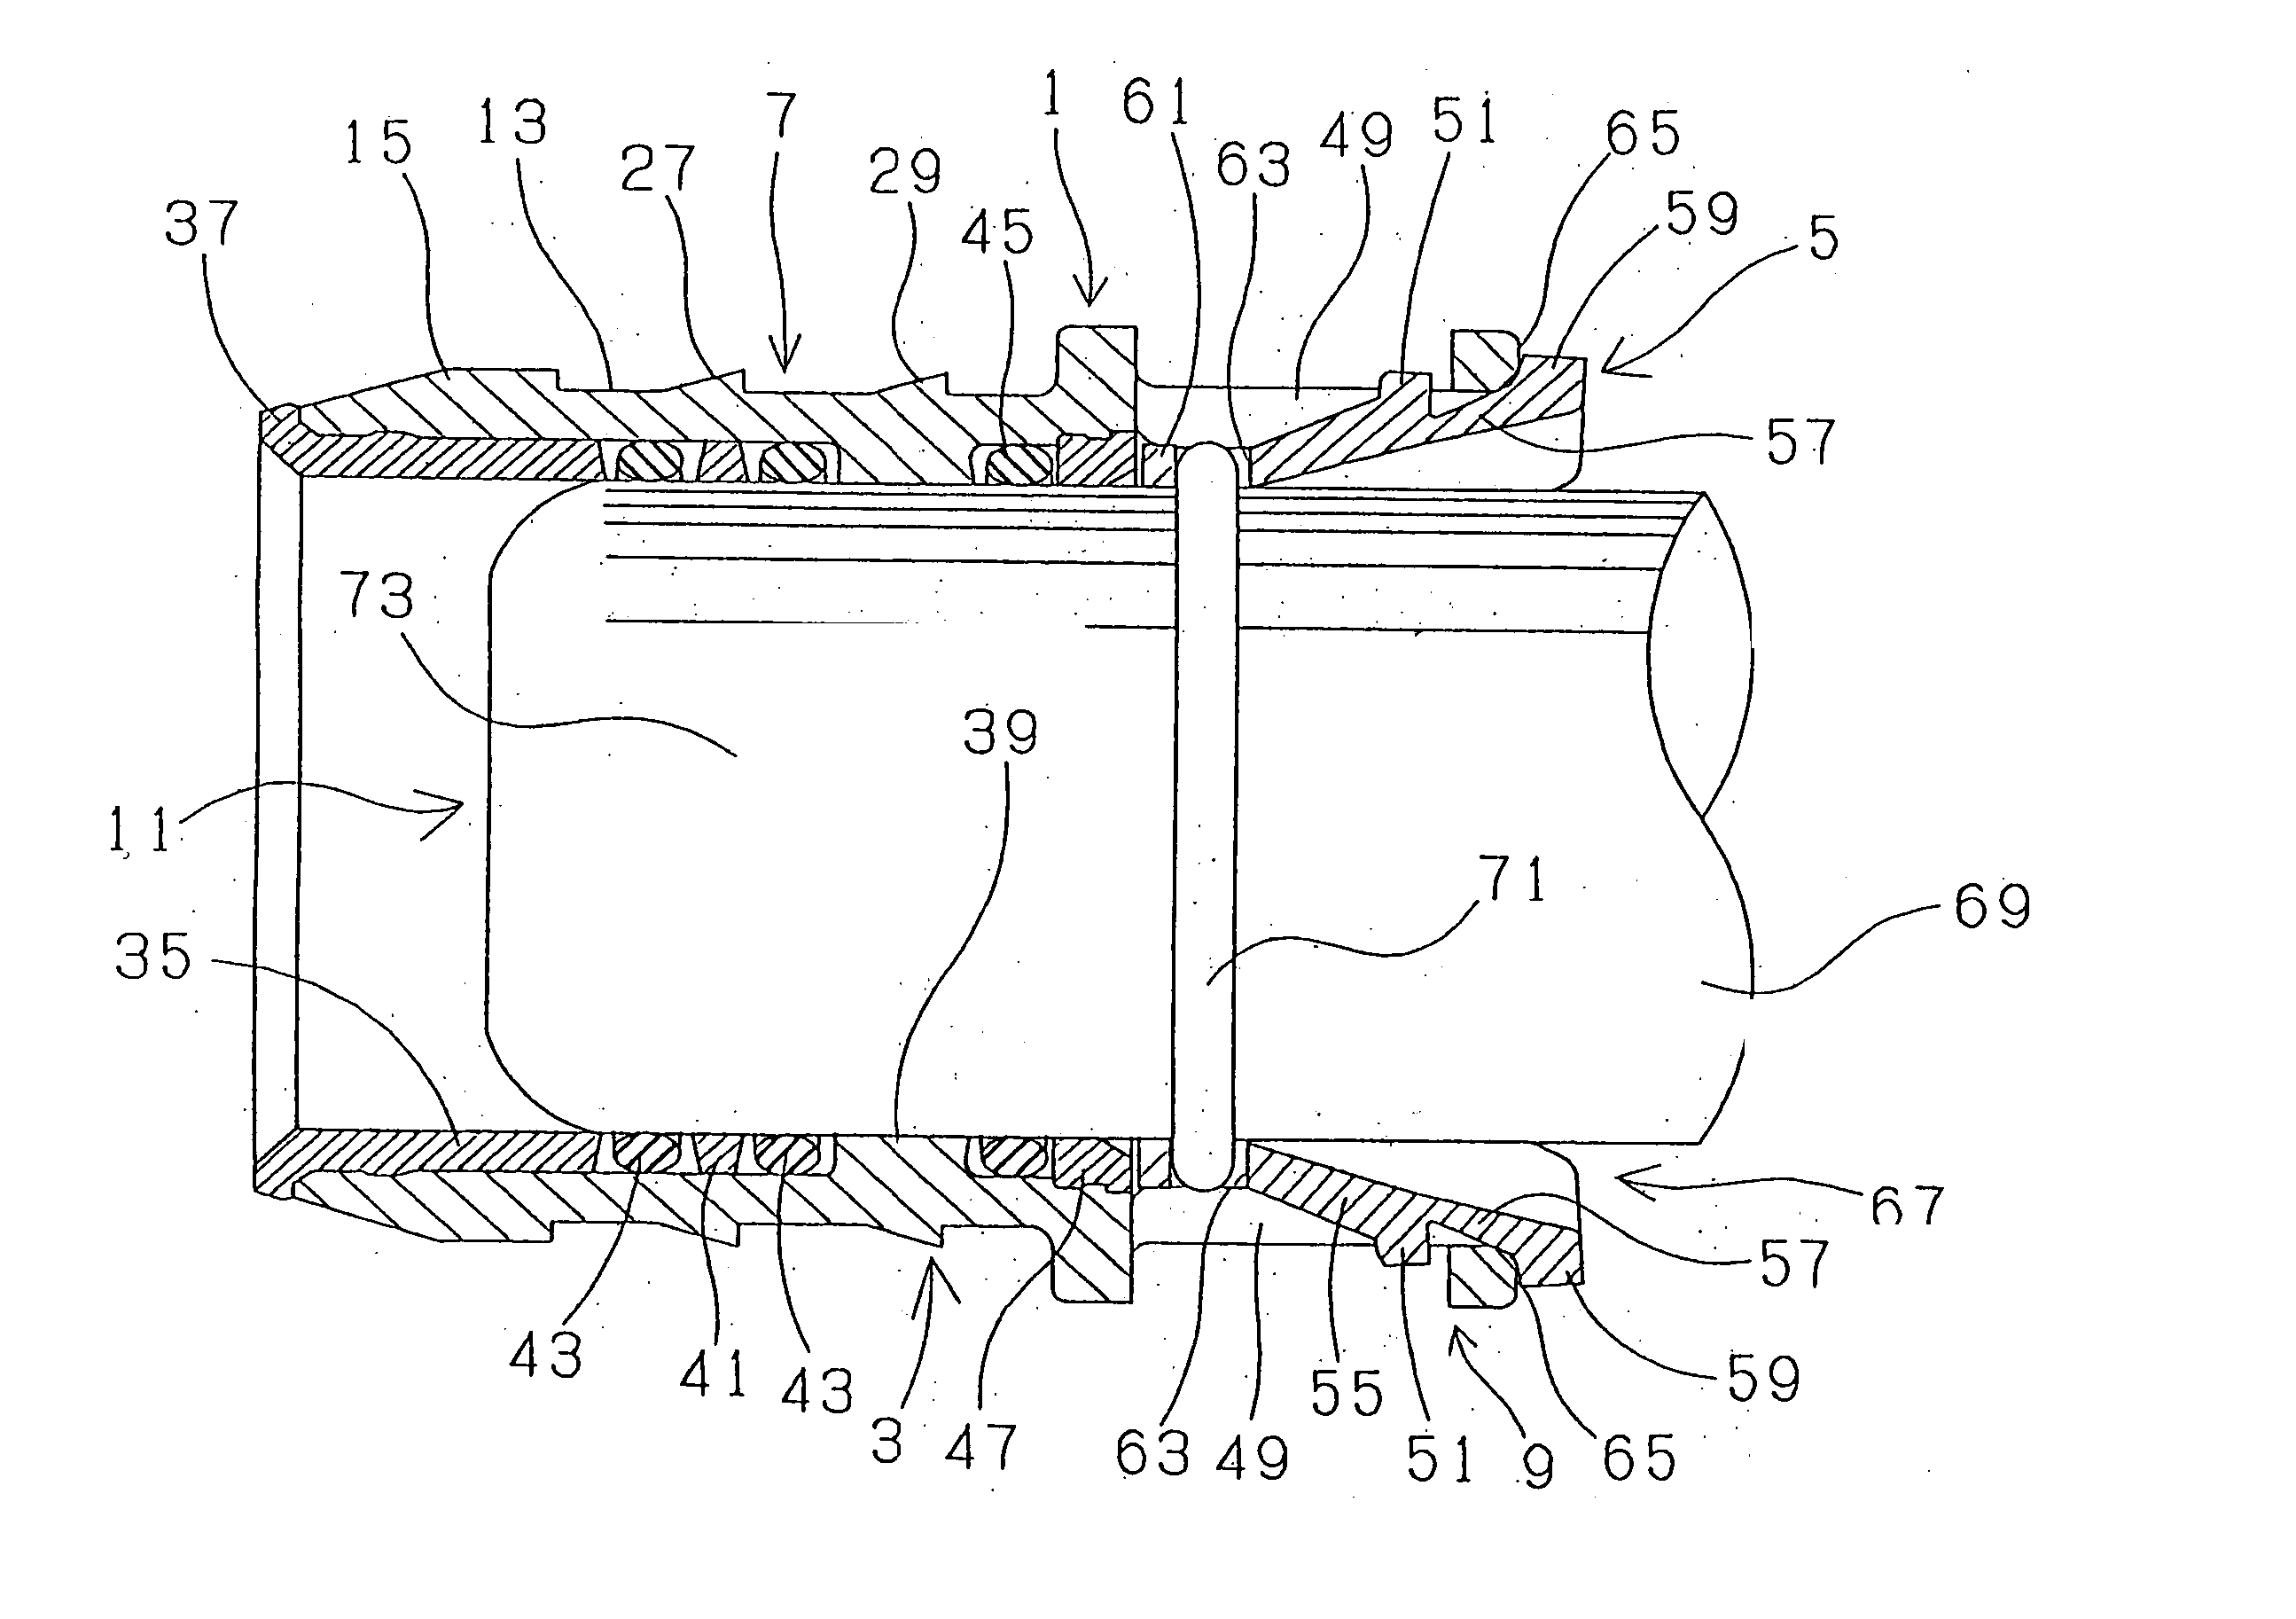 Connecting structure for a thermoplastic tube, integrated assembly and method